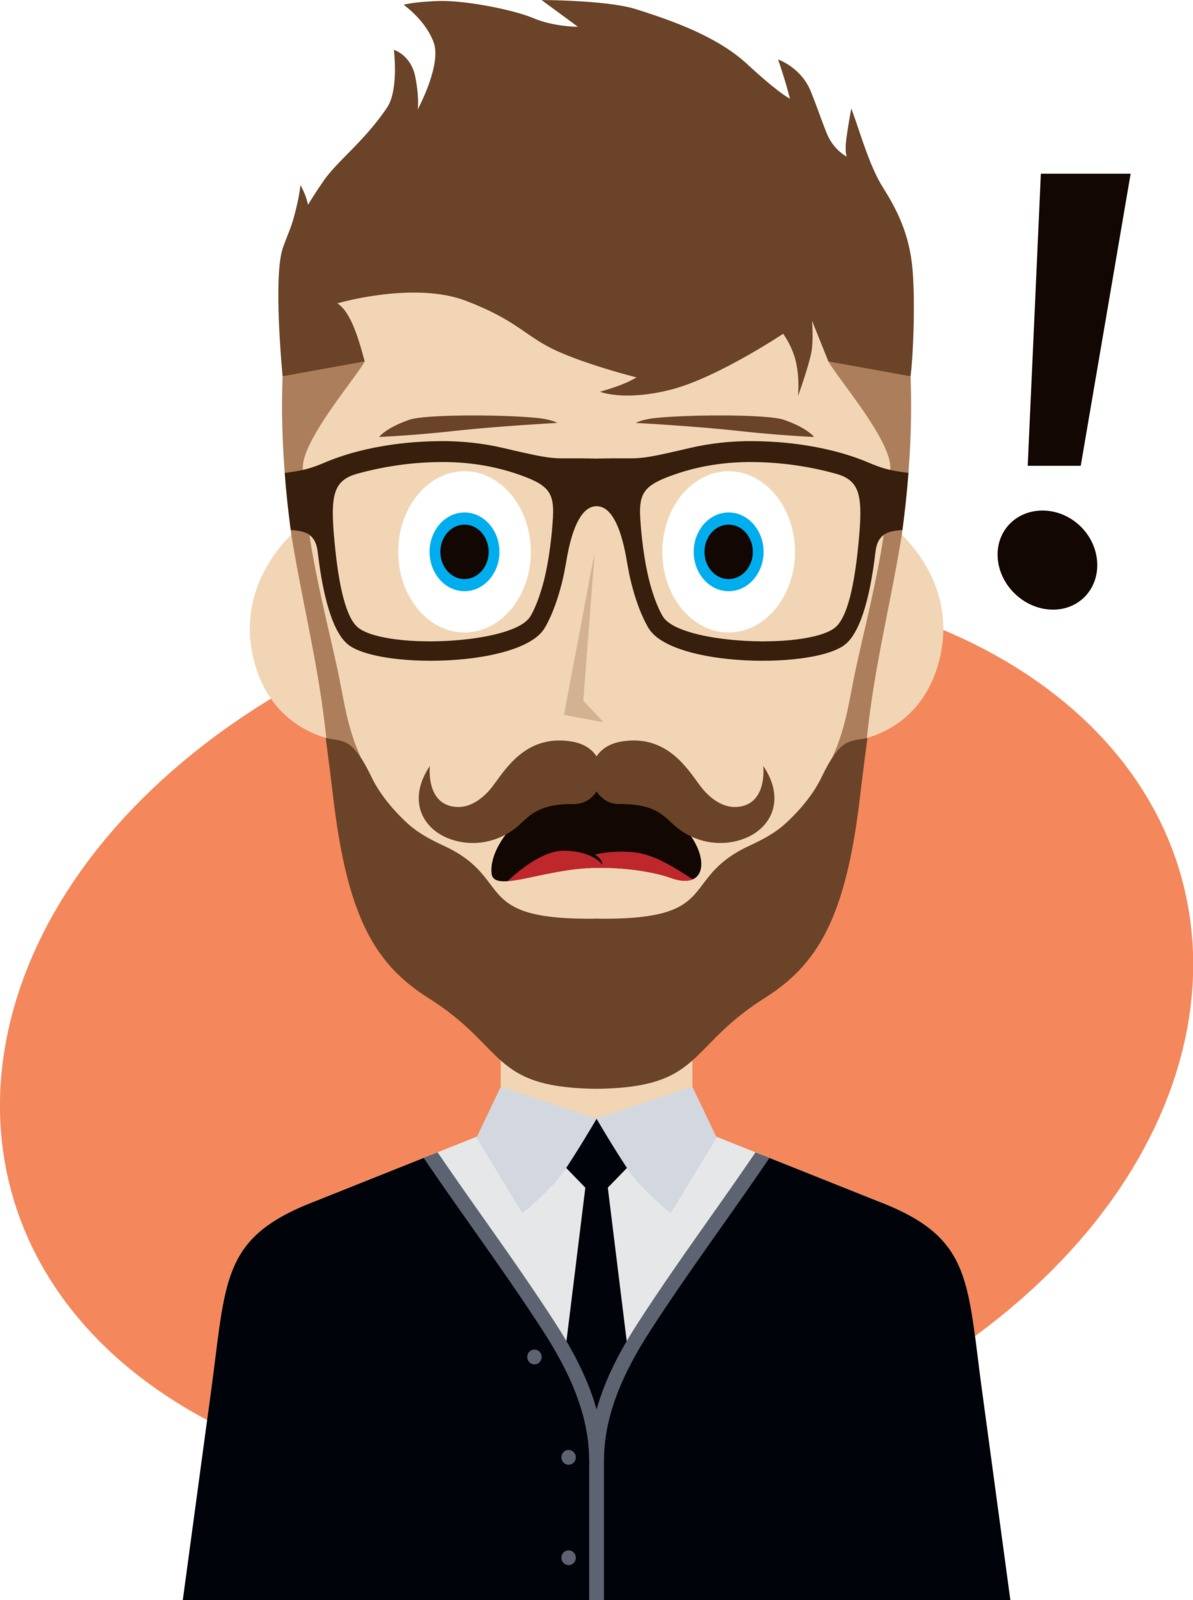 guy surprise avatar user picture cartoon character vector illustration